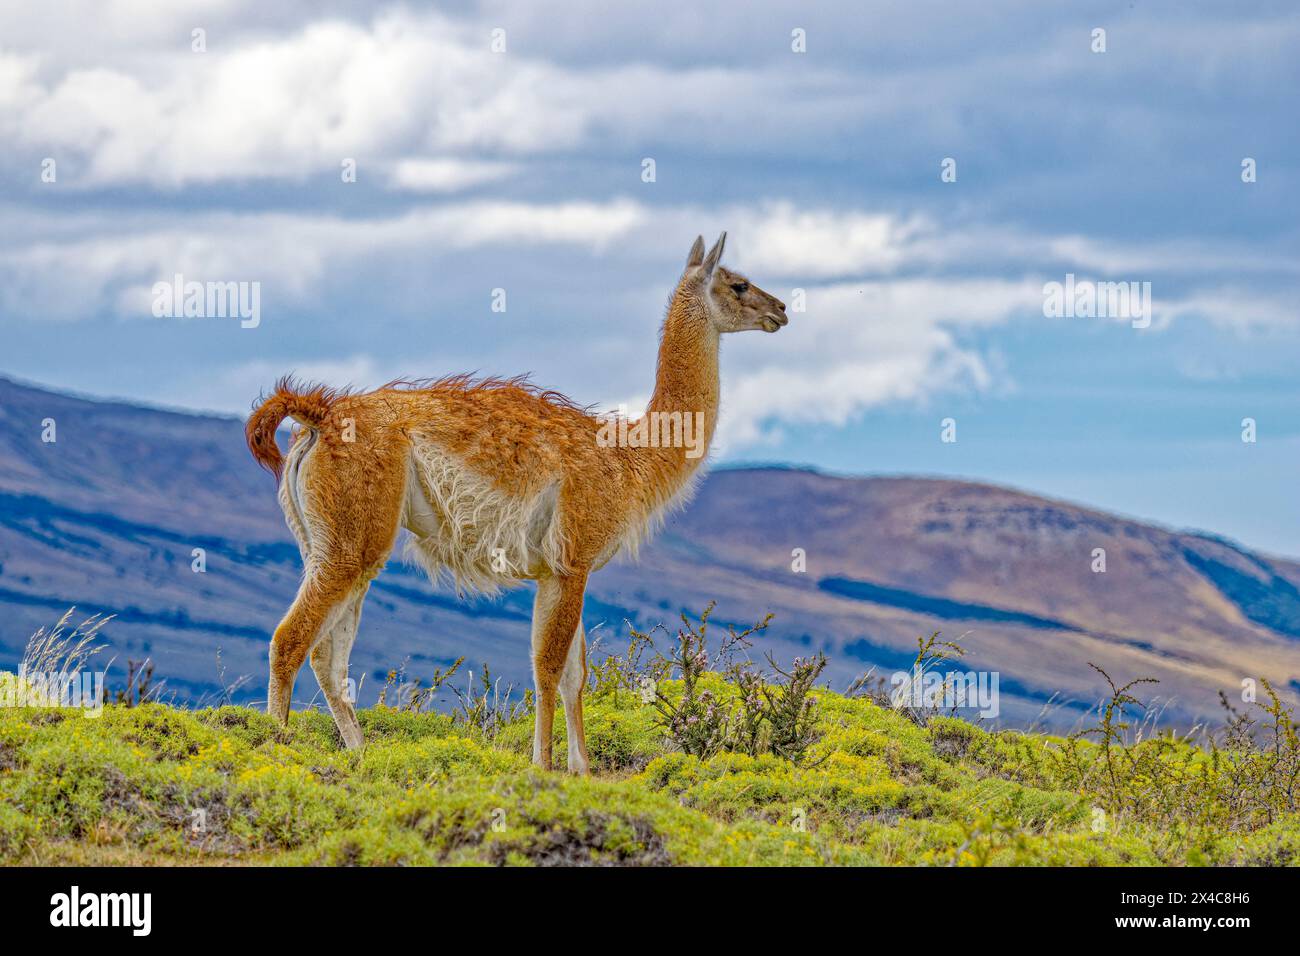 Chile, Torres del Paine National Park. Male guanaco close-up. Stock Photo